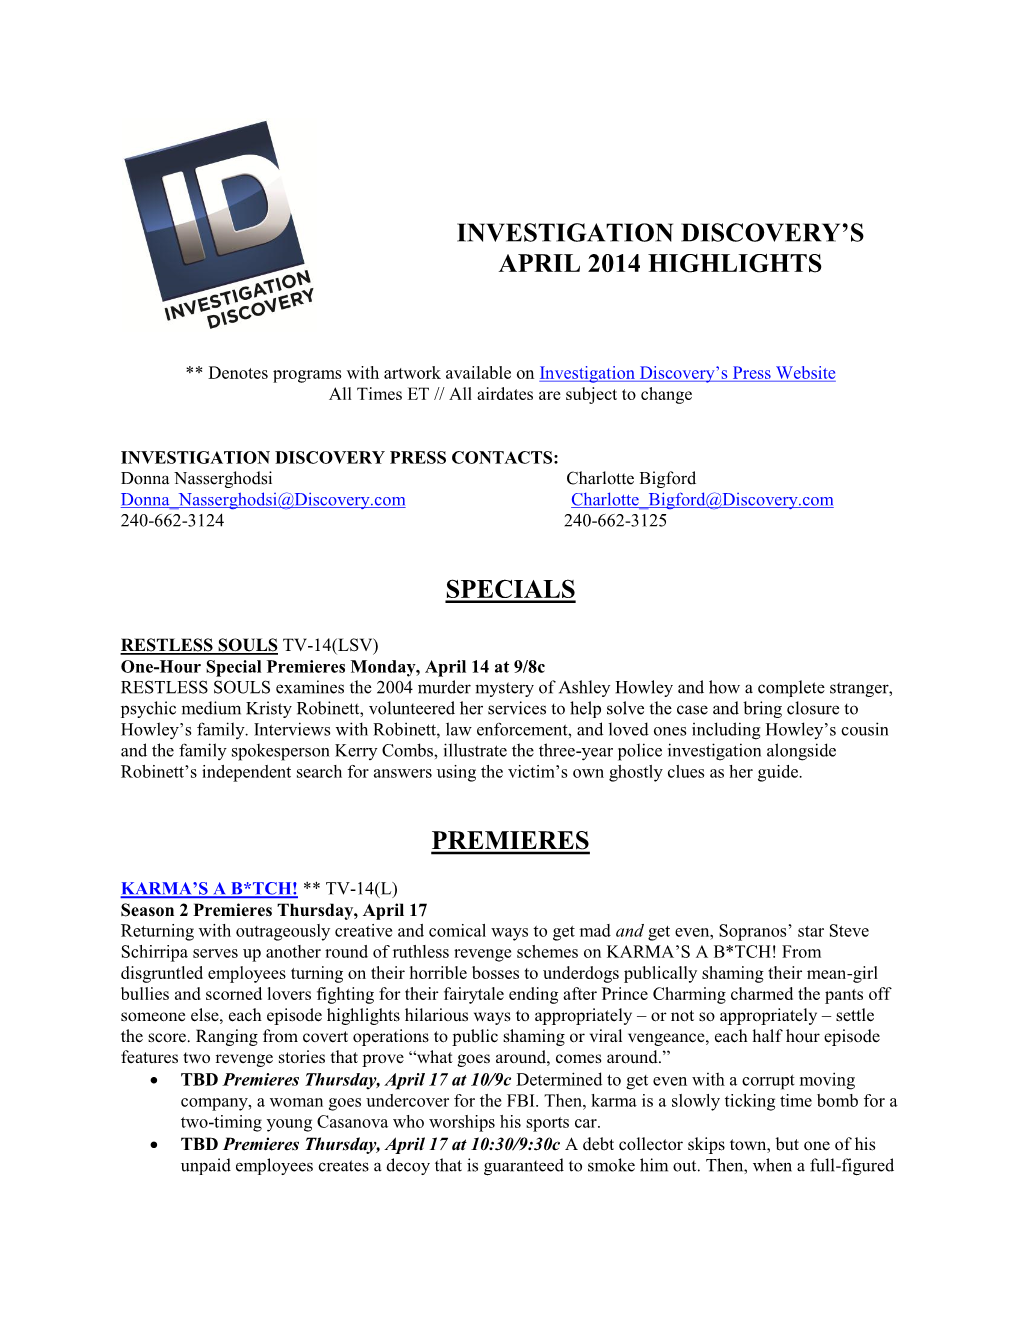 Investigation Discovery's April 2014 Programming Highlights